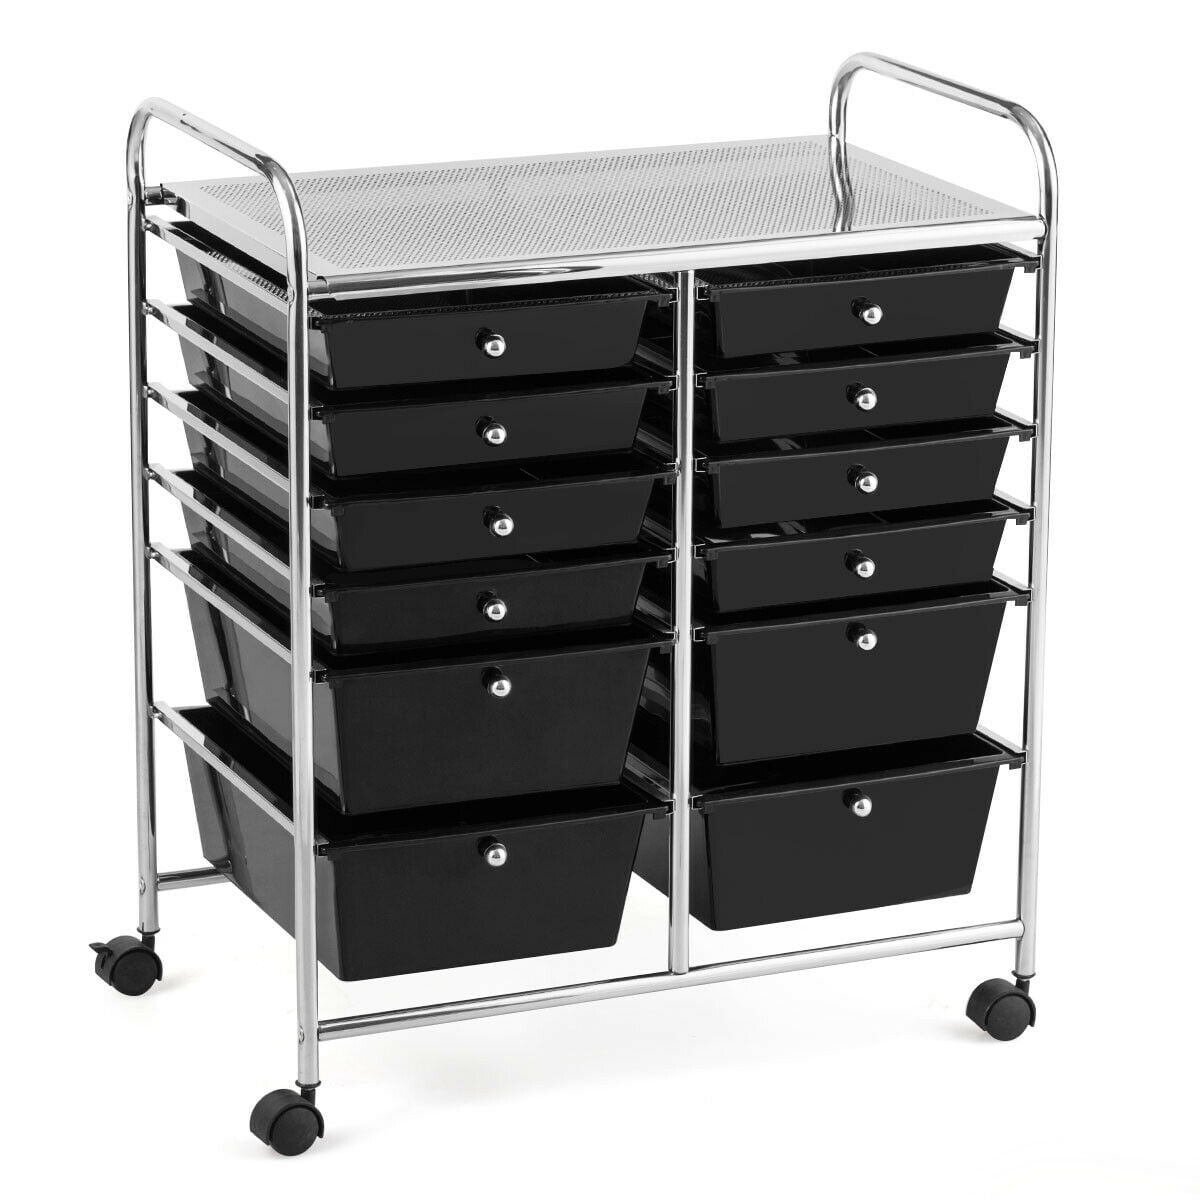 WELLFOR 10 Drawer Rolling Storage Cart Tools Scrapbook Stationery Mobile Rolling Storage with Tray Cart Office School Home Organizer Black